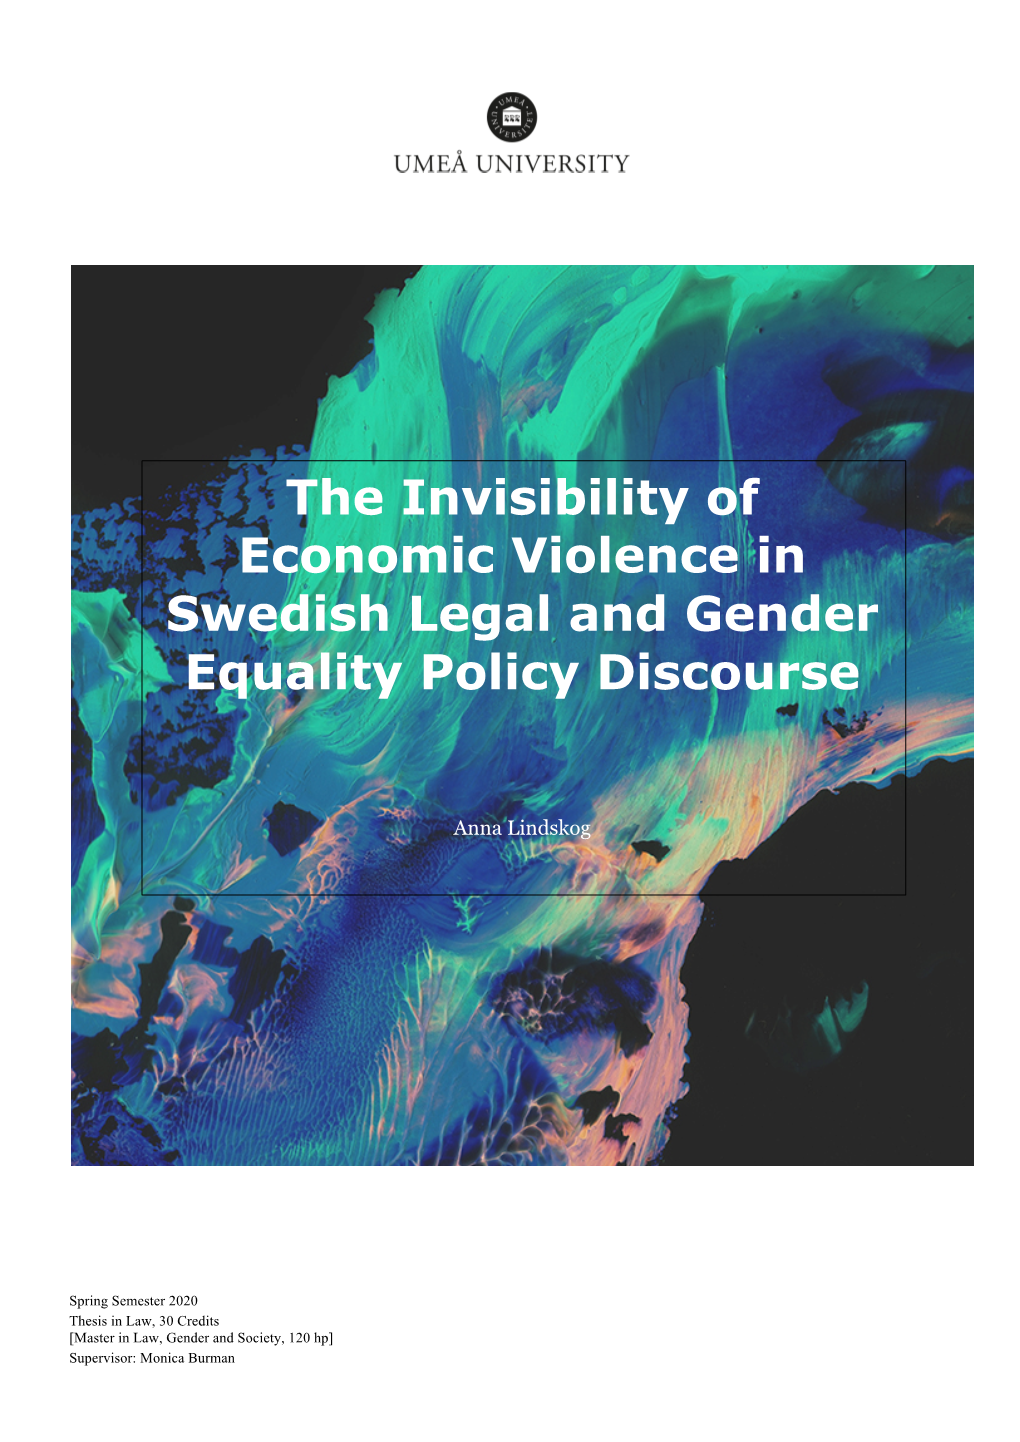 The Invisibility of Economic Violence in Swedish Legal and Gender Equality Policy Discourse